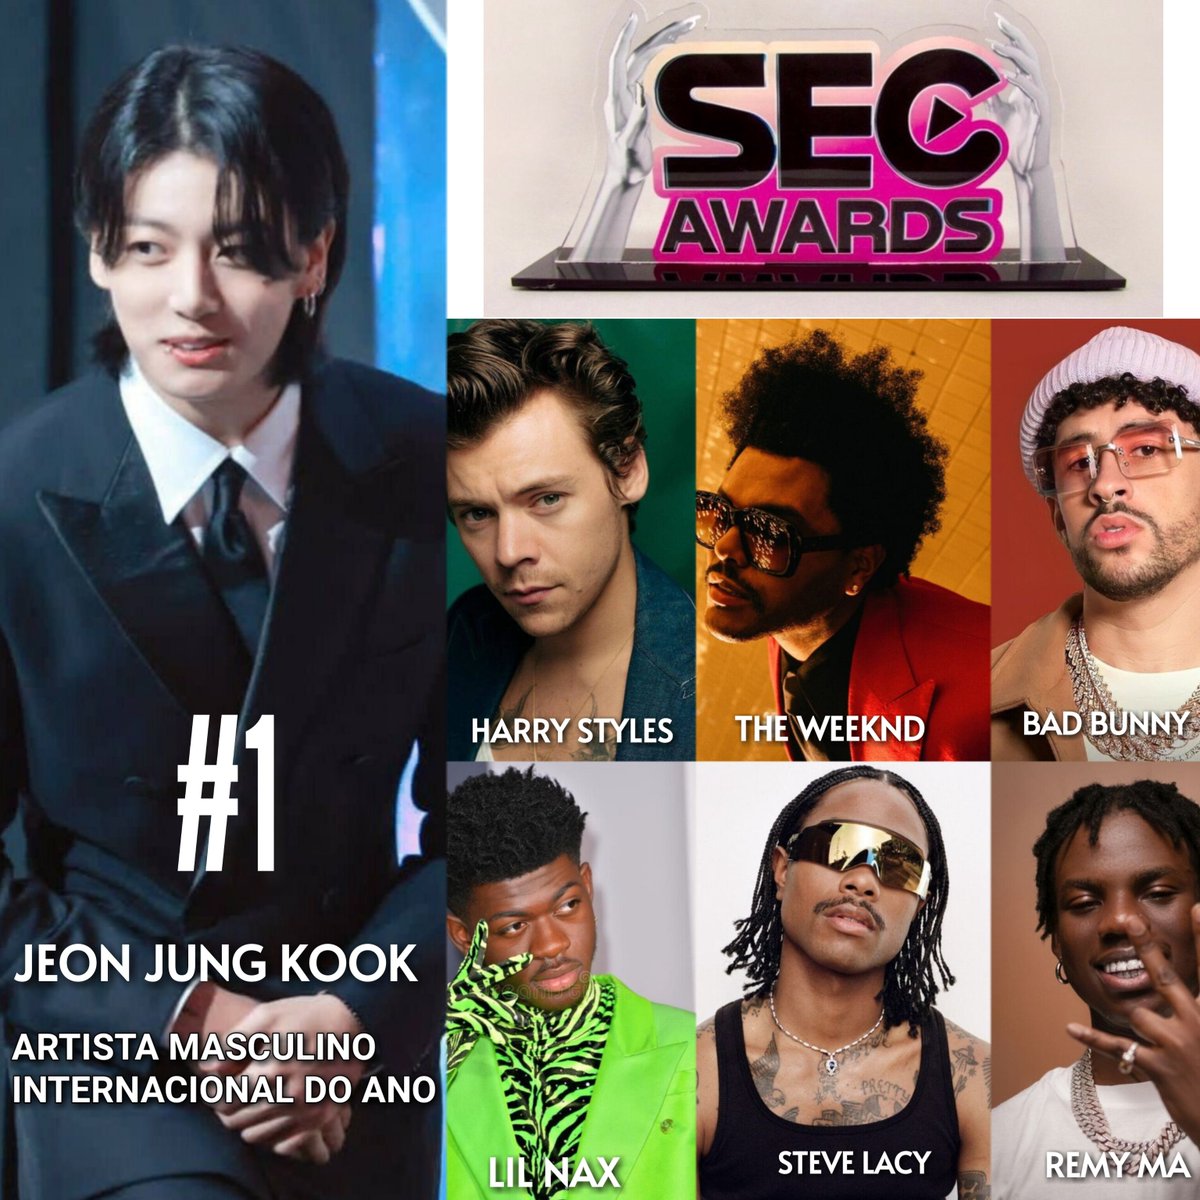 Jungkook won 'International Male Artist of the Year' over Harry Styles, The Weeknd, Bad Bunny...at the @secawards 2023. He will recieve a physical trophy for the win .🏆